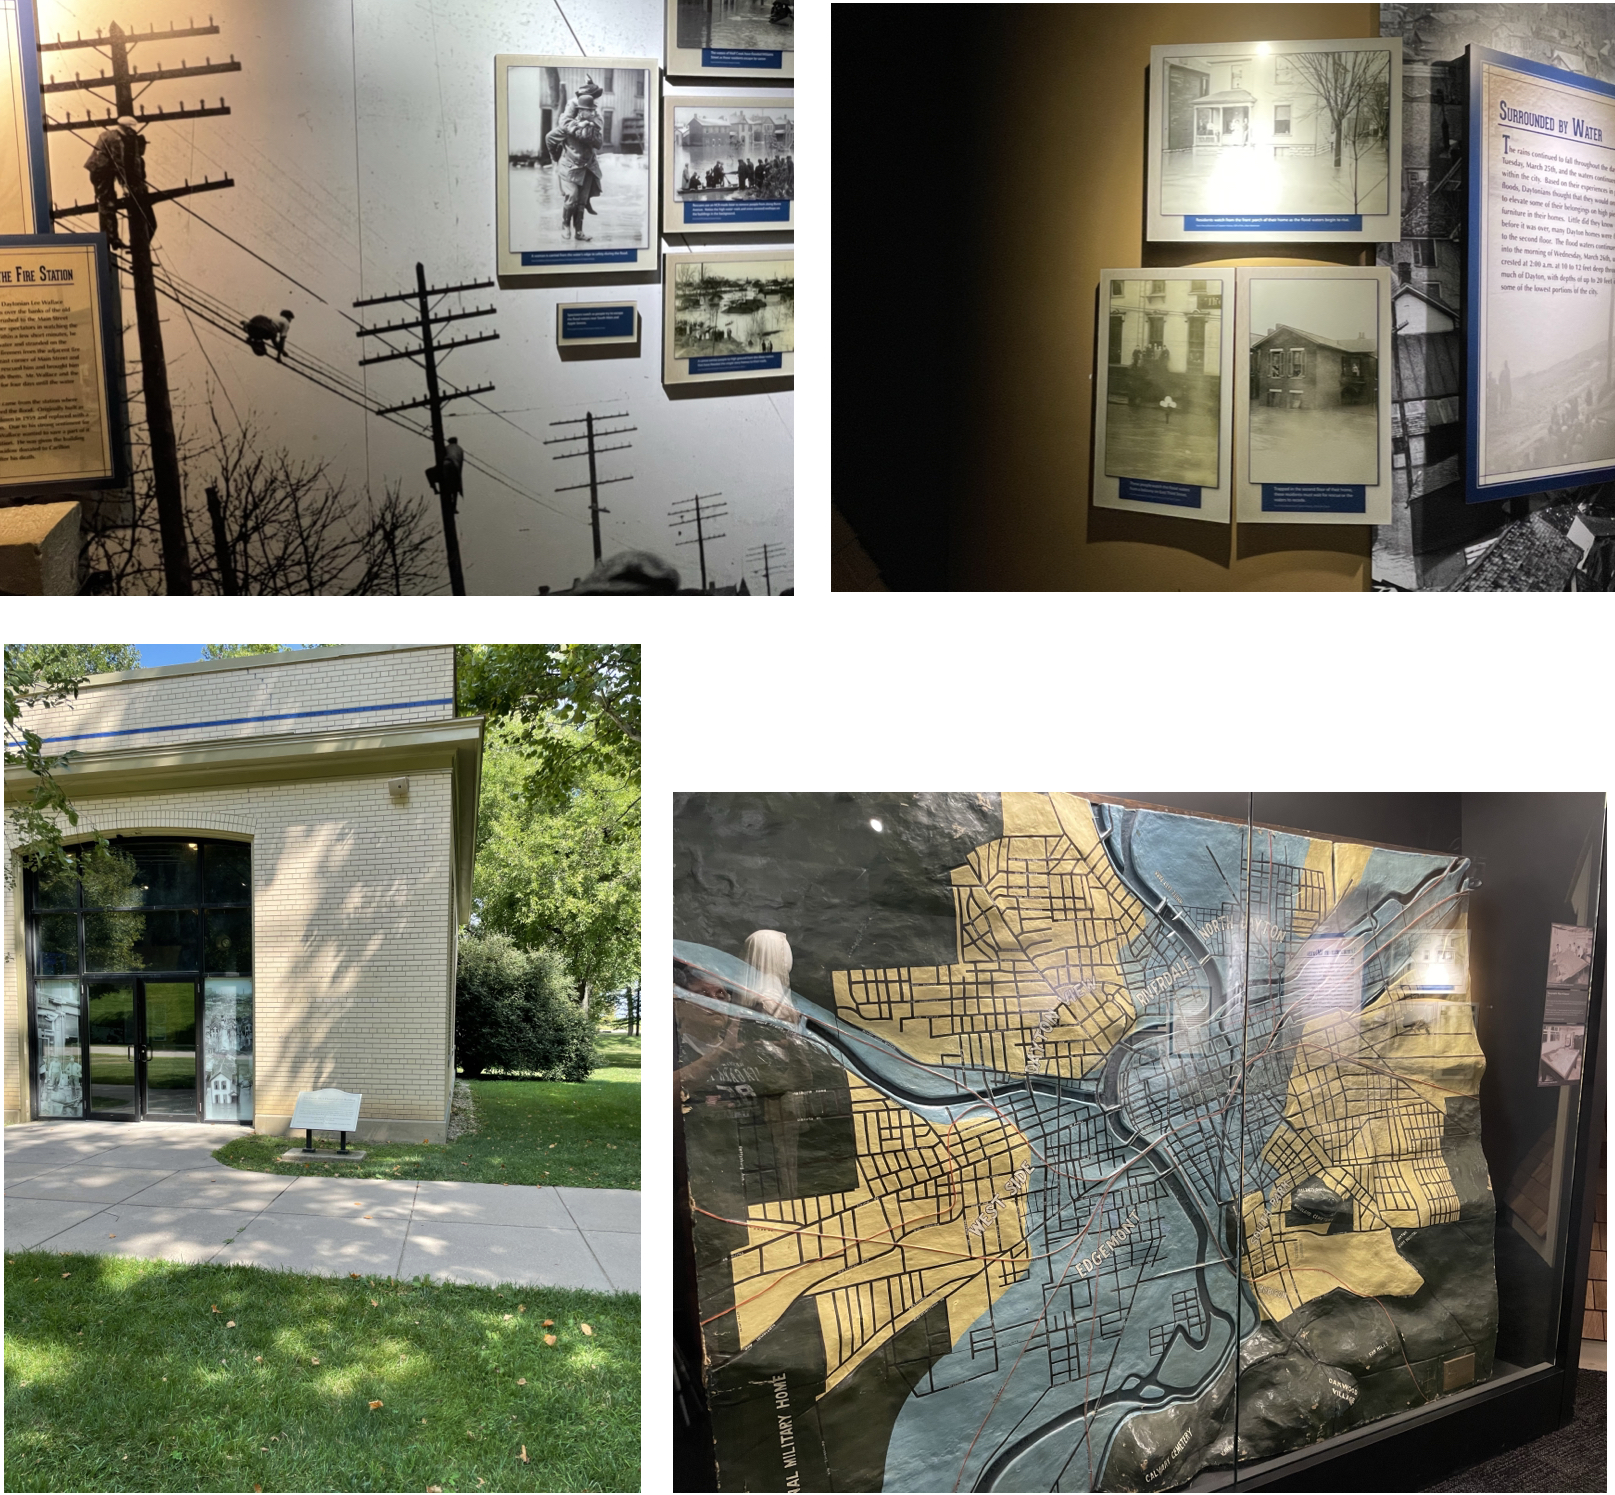 Photos of displays at the flood museum at the Dayton Historical park.  Photos taken by and the property of FourWalls.